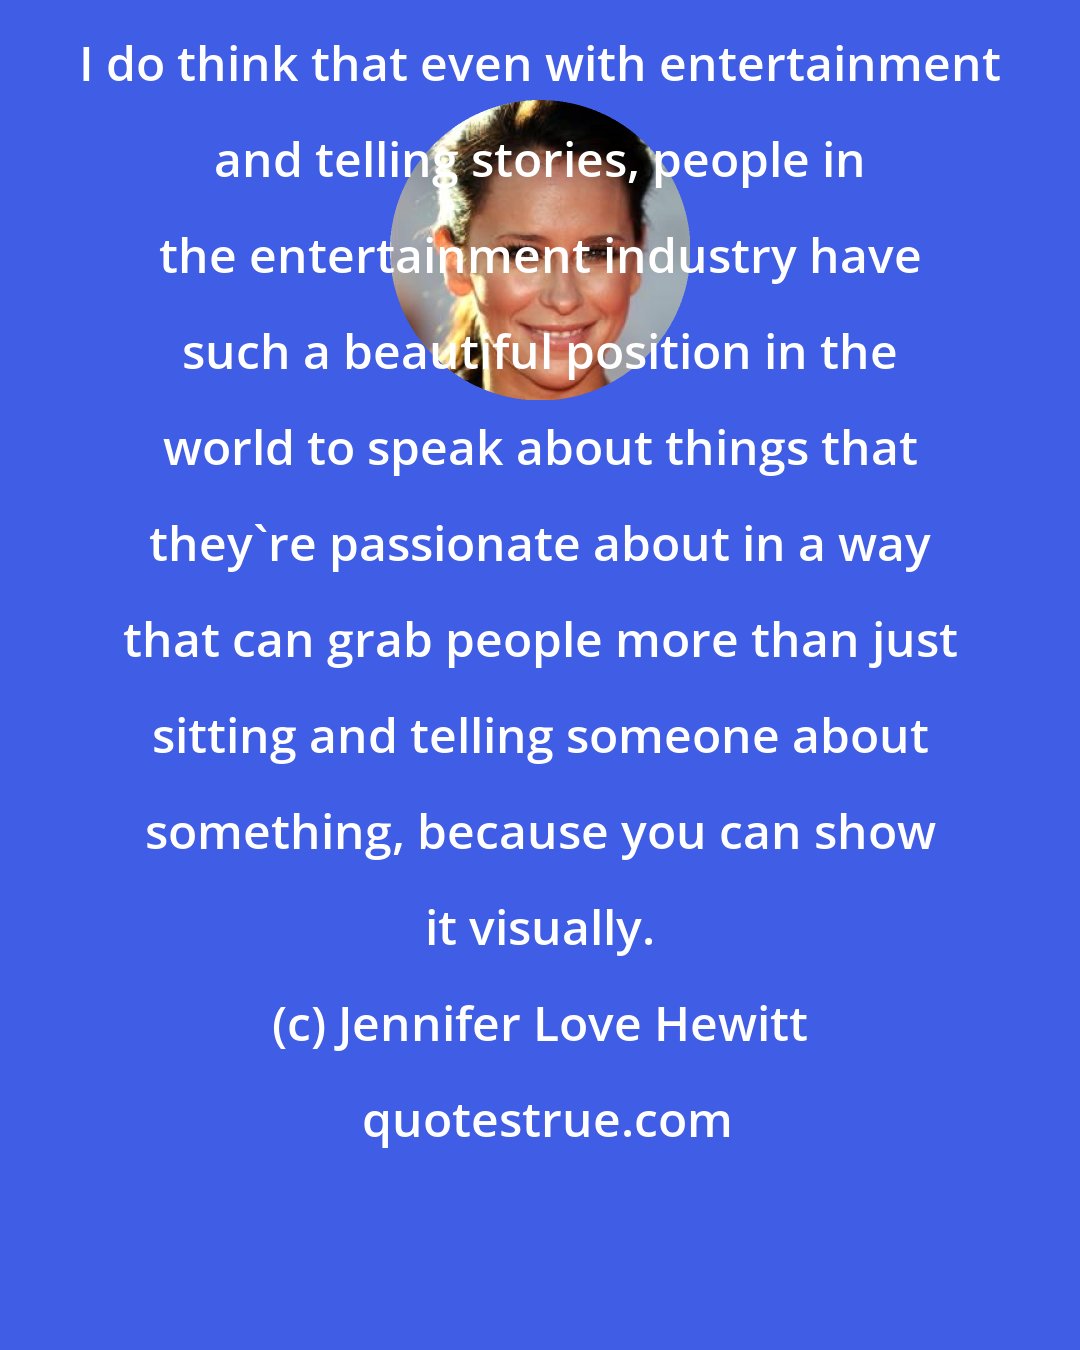 Jennifer Love Hewitt: I do think that even with entertainment and telling stories, people in the entertainment industry have such a beautiful position in the world to speak about things that they're passionate about in a way that can grab people more than just sitting and telling someone about something, because you can show it visually.